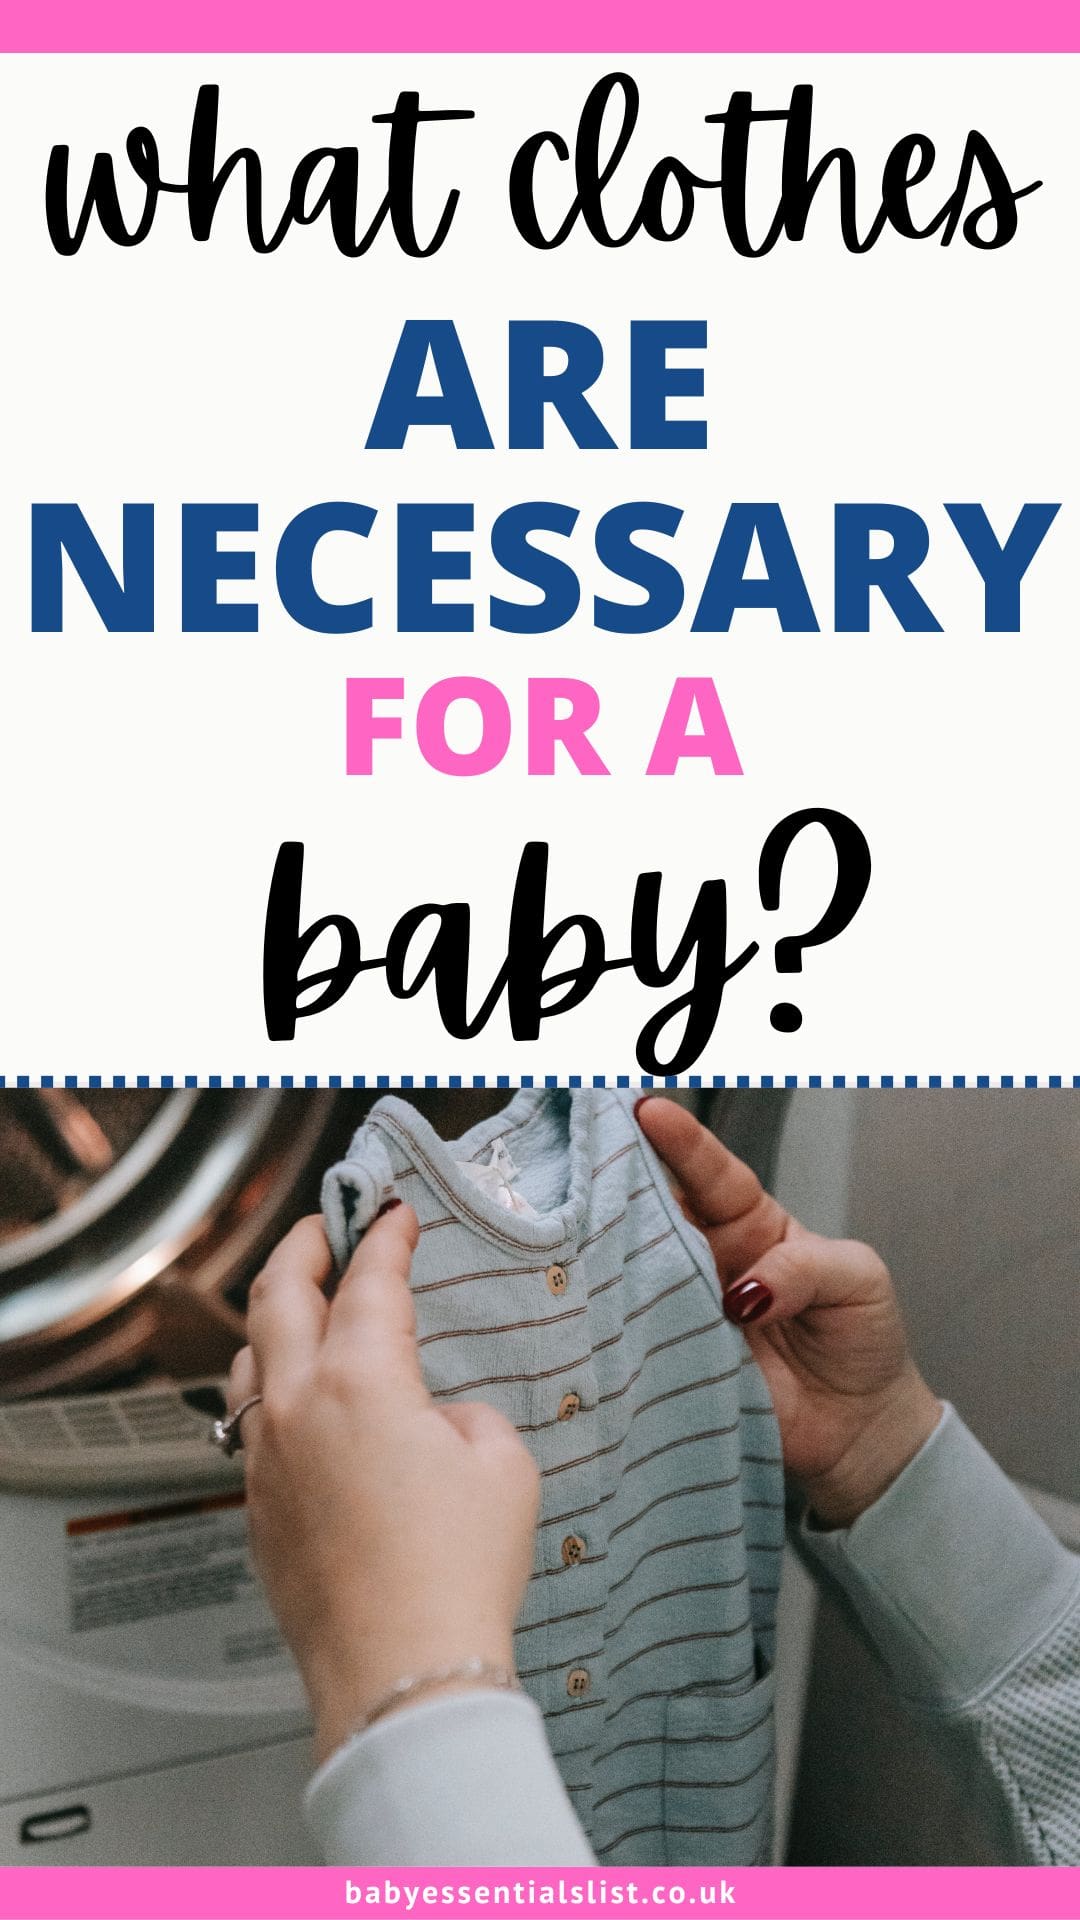 What clothes are necessary for a baby?